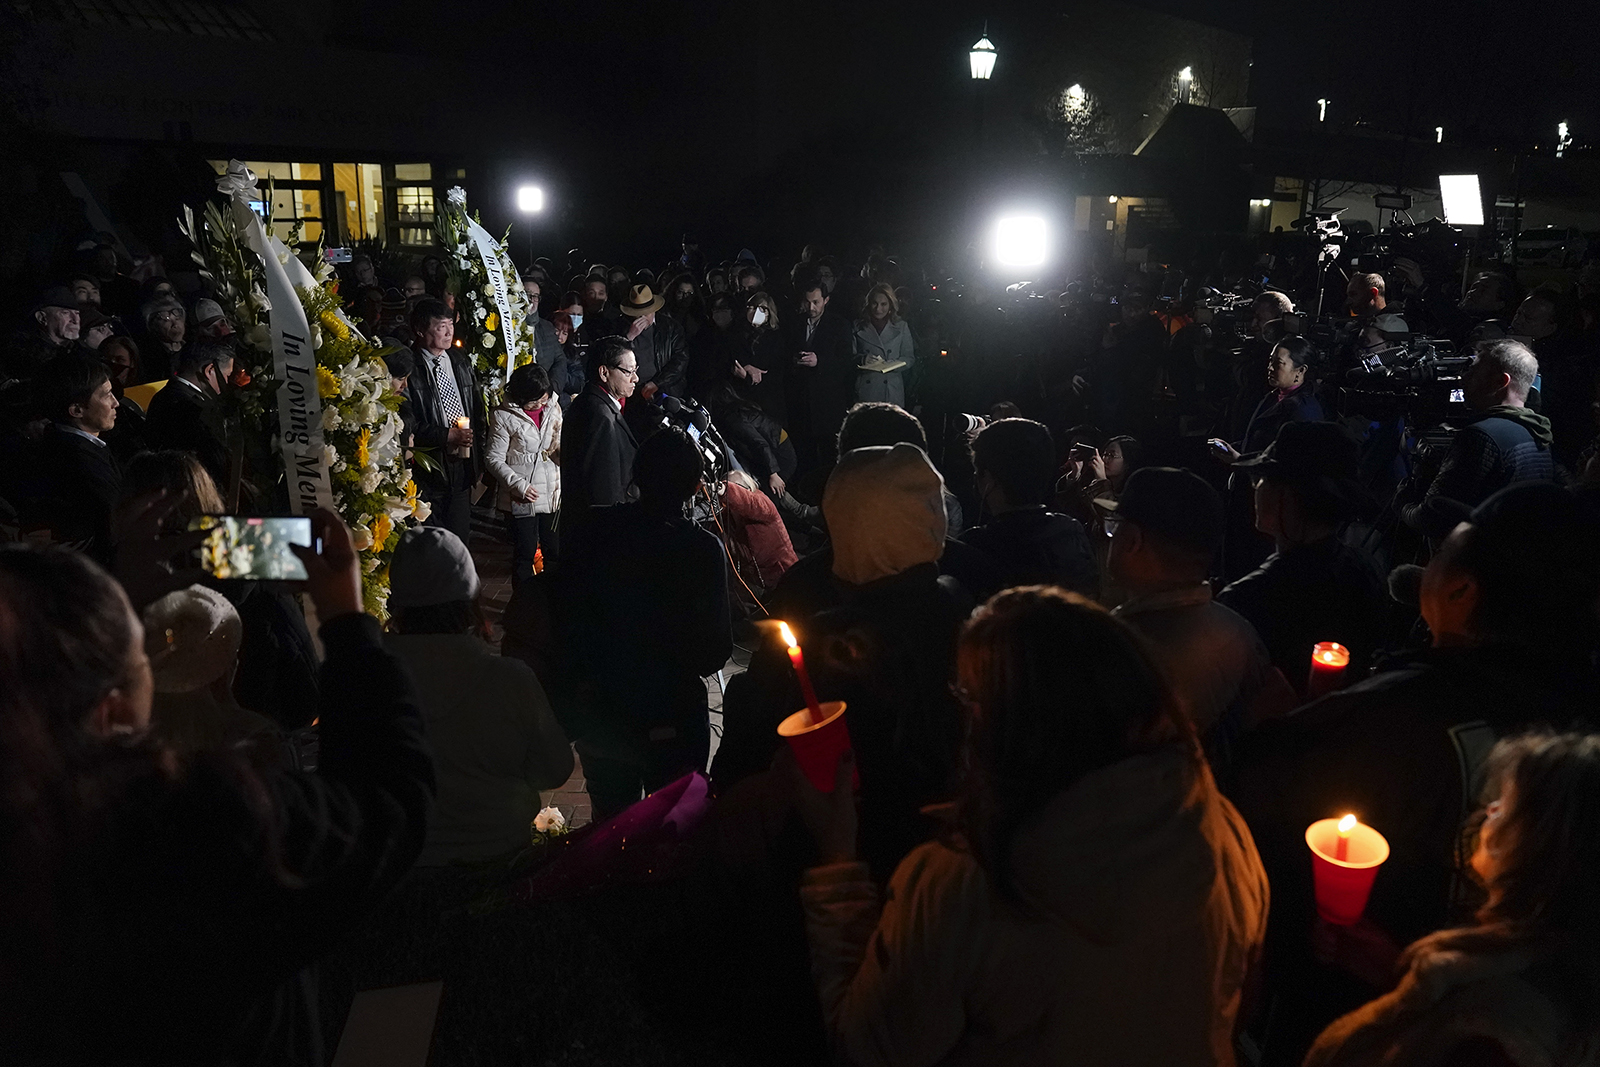 People gather for a vigil honoring the victims of a mass shooting at Star Ballroom Dance Studio, Monday, Jan. 23, 2023, in Monterey Park, Calif. A gunman killed multiple people late Saturday amid Lunar New Year's celebrations in the predominantly Asian American community. (AP Photo/Ashley Landis)